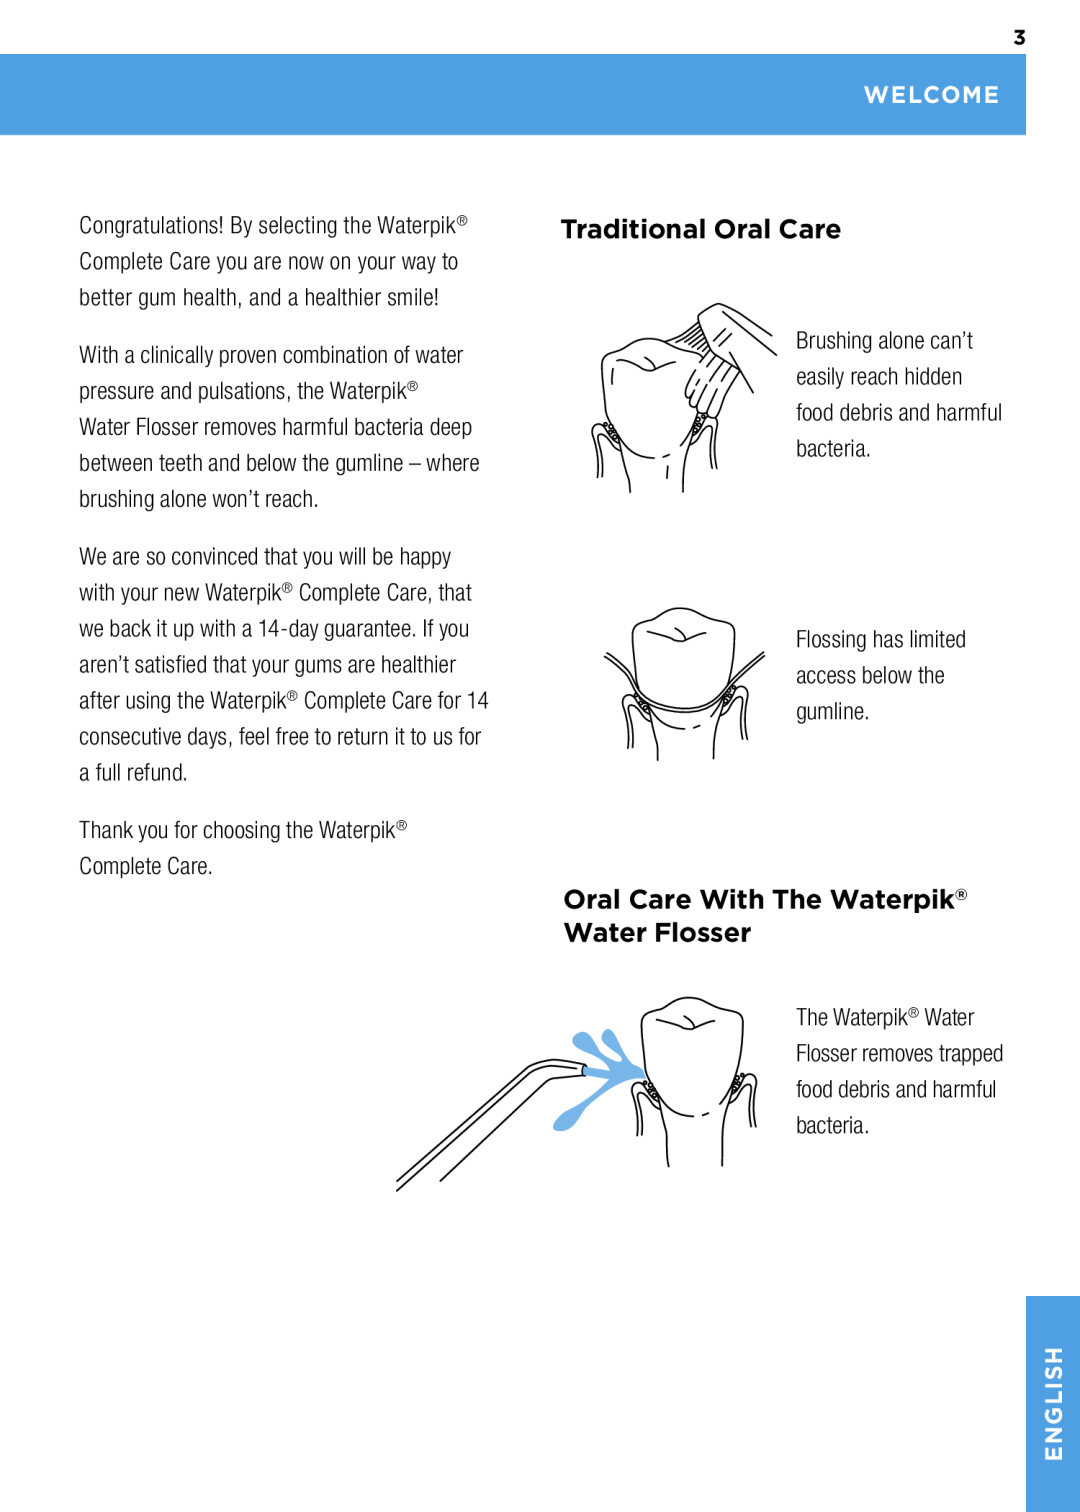 Waterpik Technologies wp-900 manual Traditional Oral Care, Oral Care With The Waterpik Water Flosser, Welcome, English 